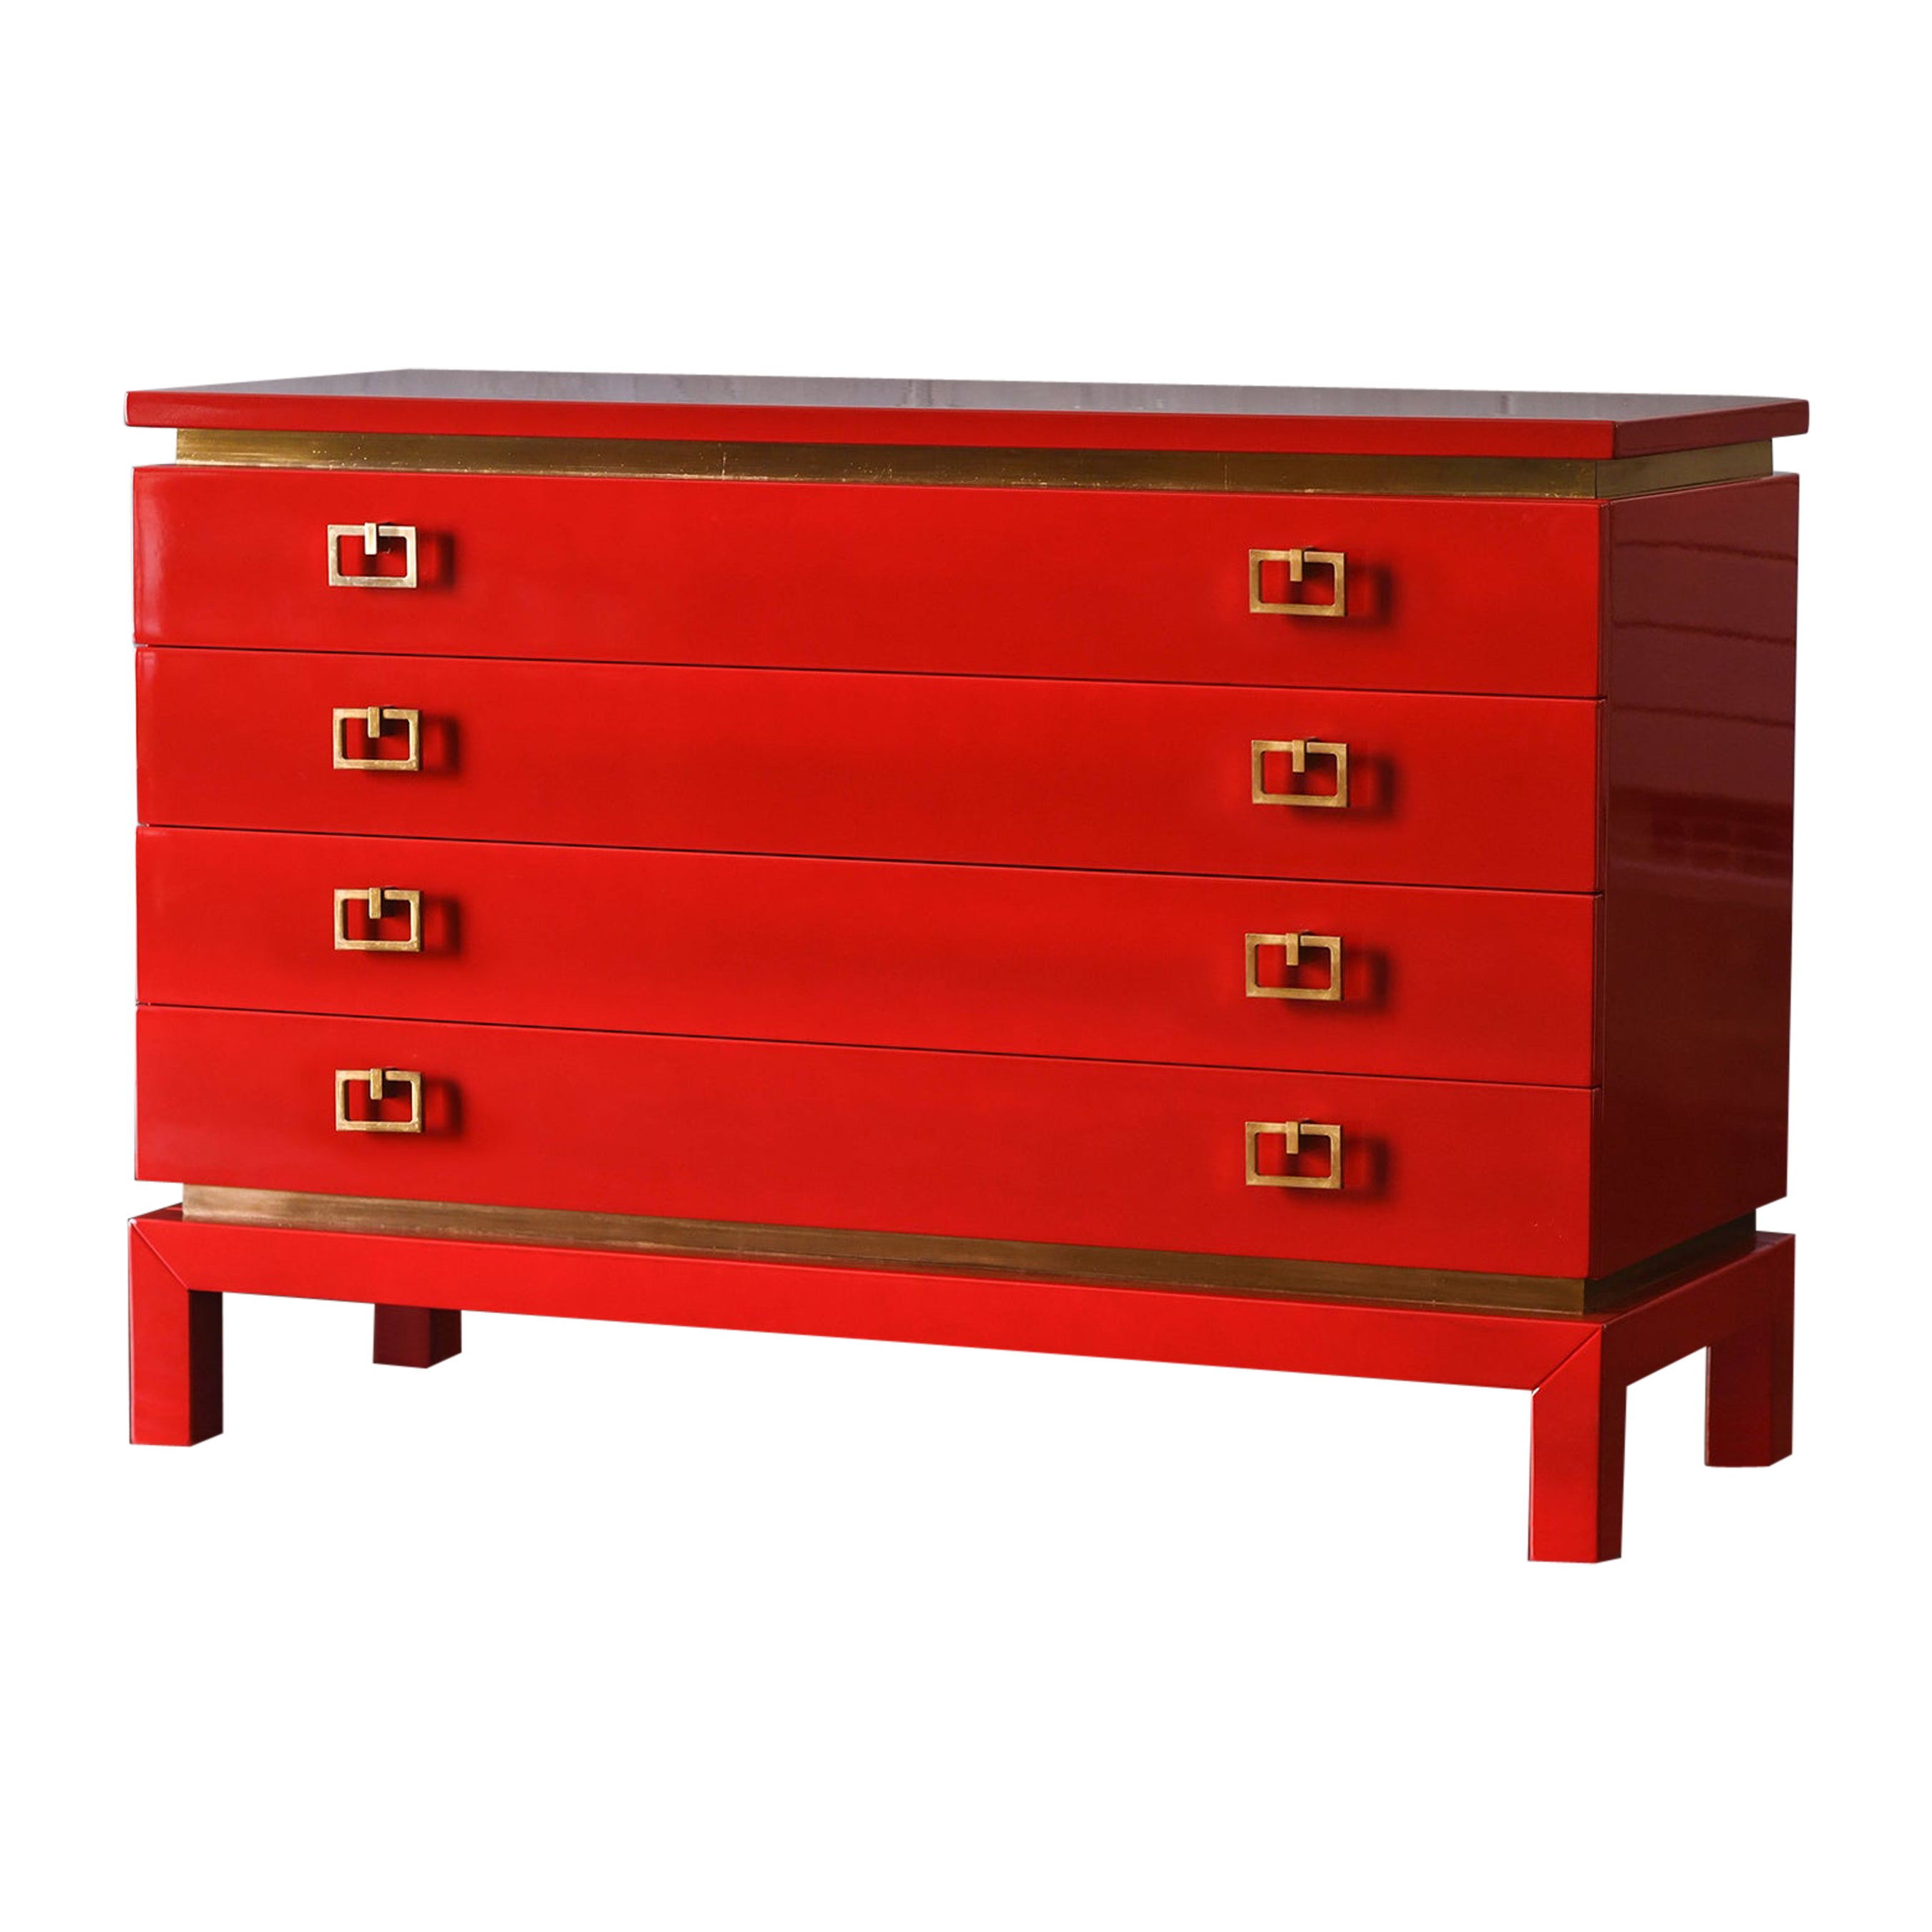 China Red Chest Of Drawers With Brass Details From The 1970s – Lacquered Series